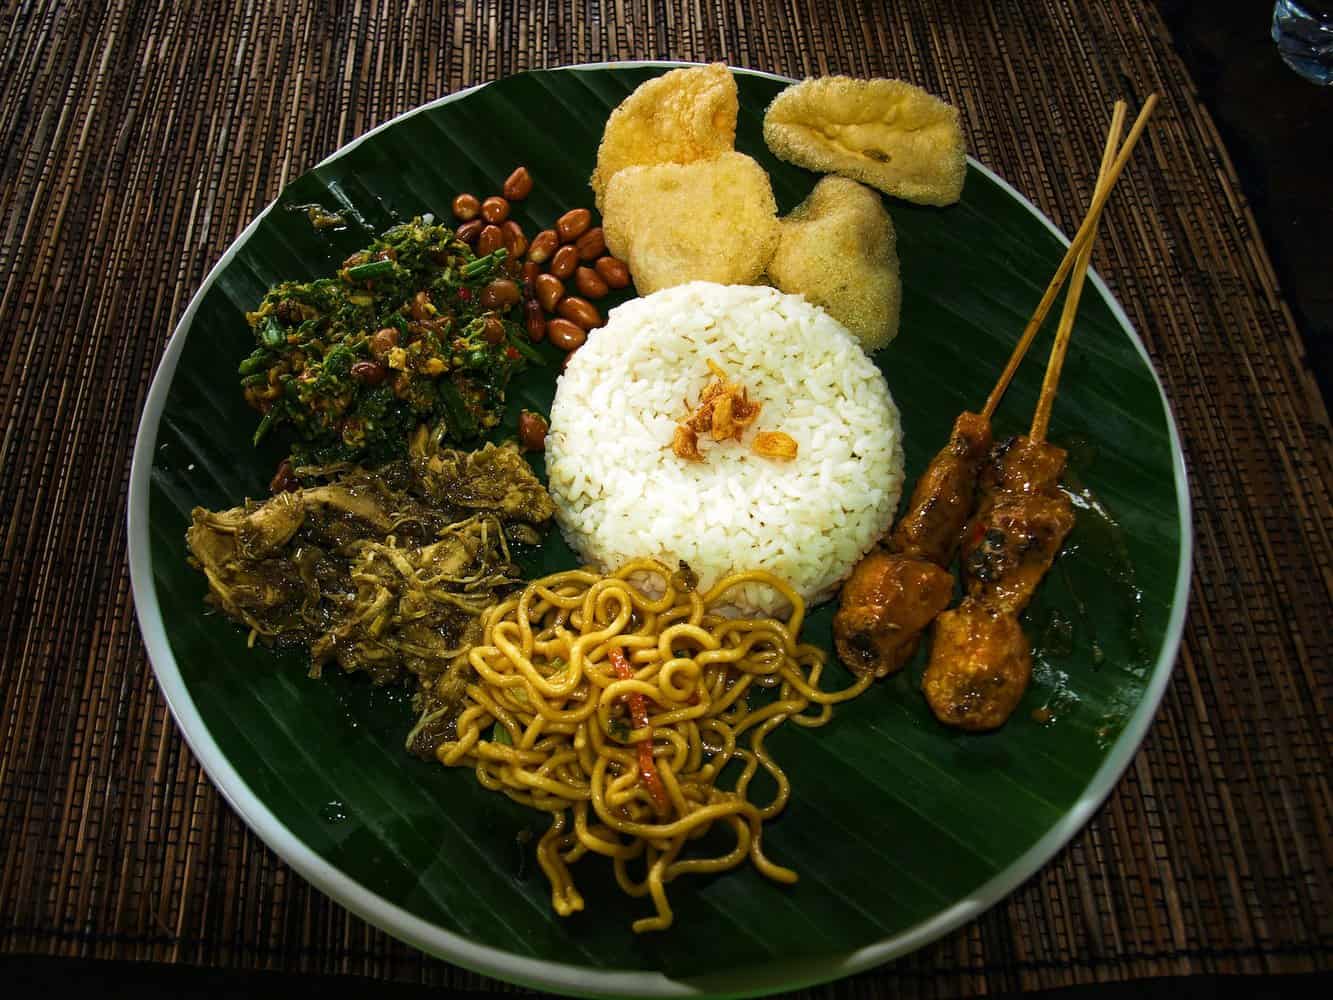 nasi campur: a famous balinese dish/ selected form a buffet. a green plate topped with lots of food. bali vs thailand